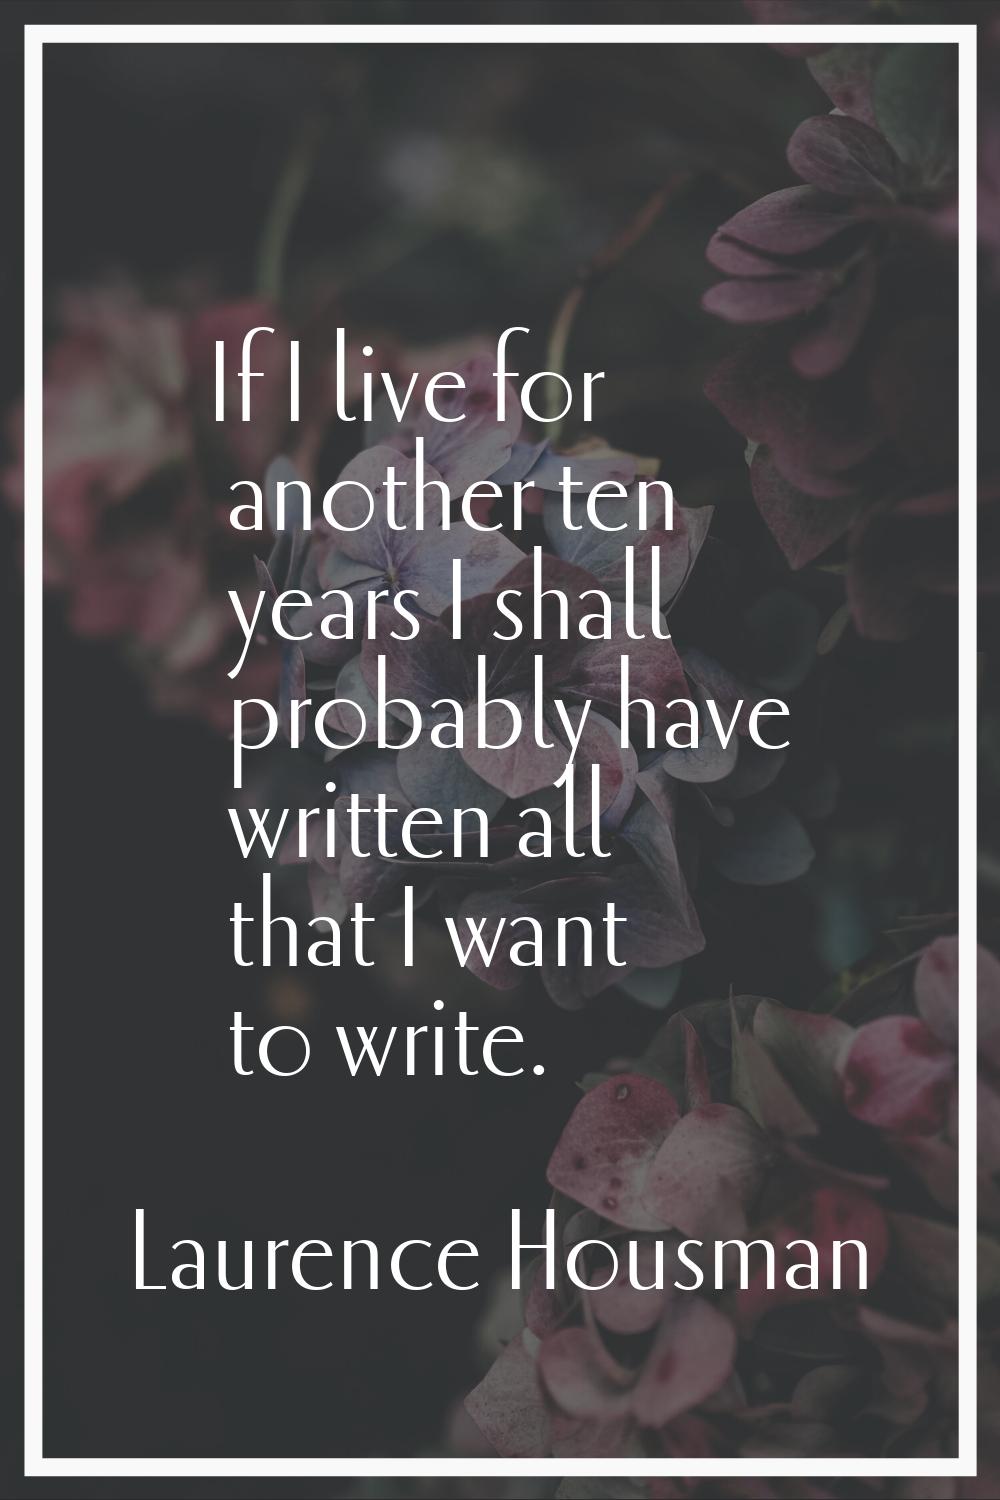 If I live for another ten years I shall probably have written all that I want to write.